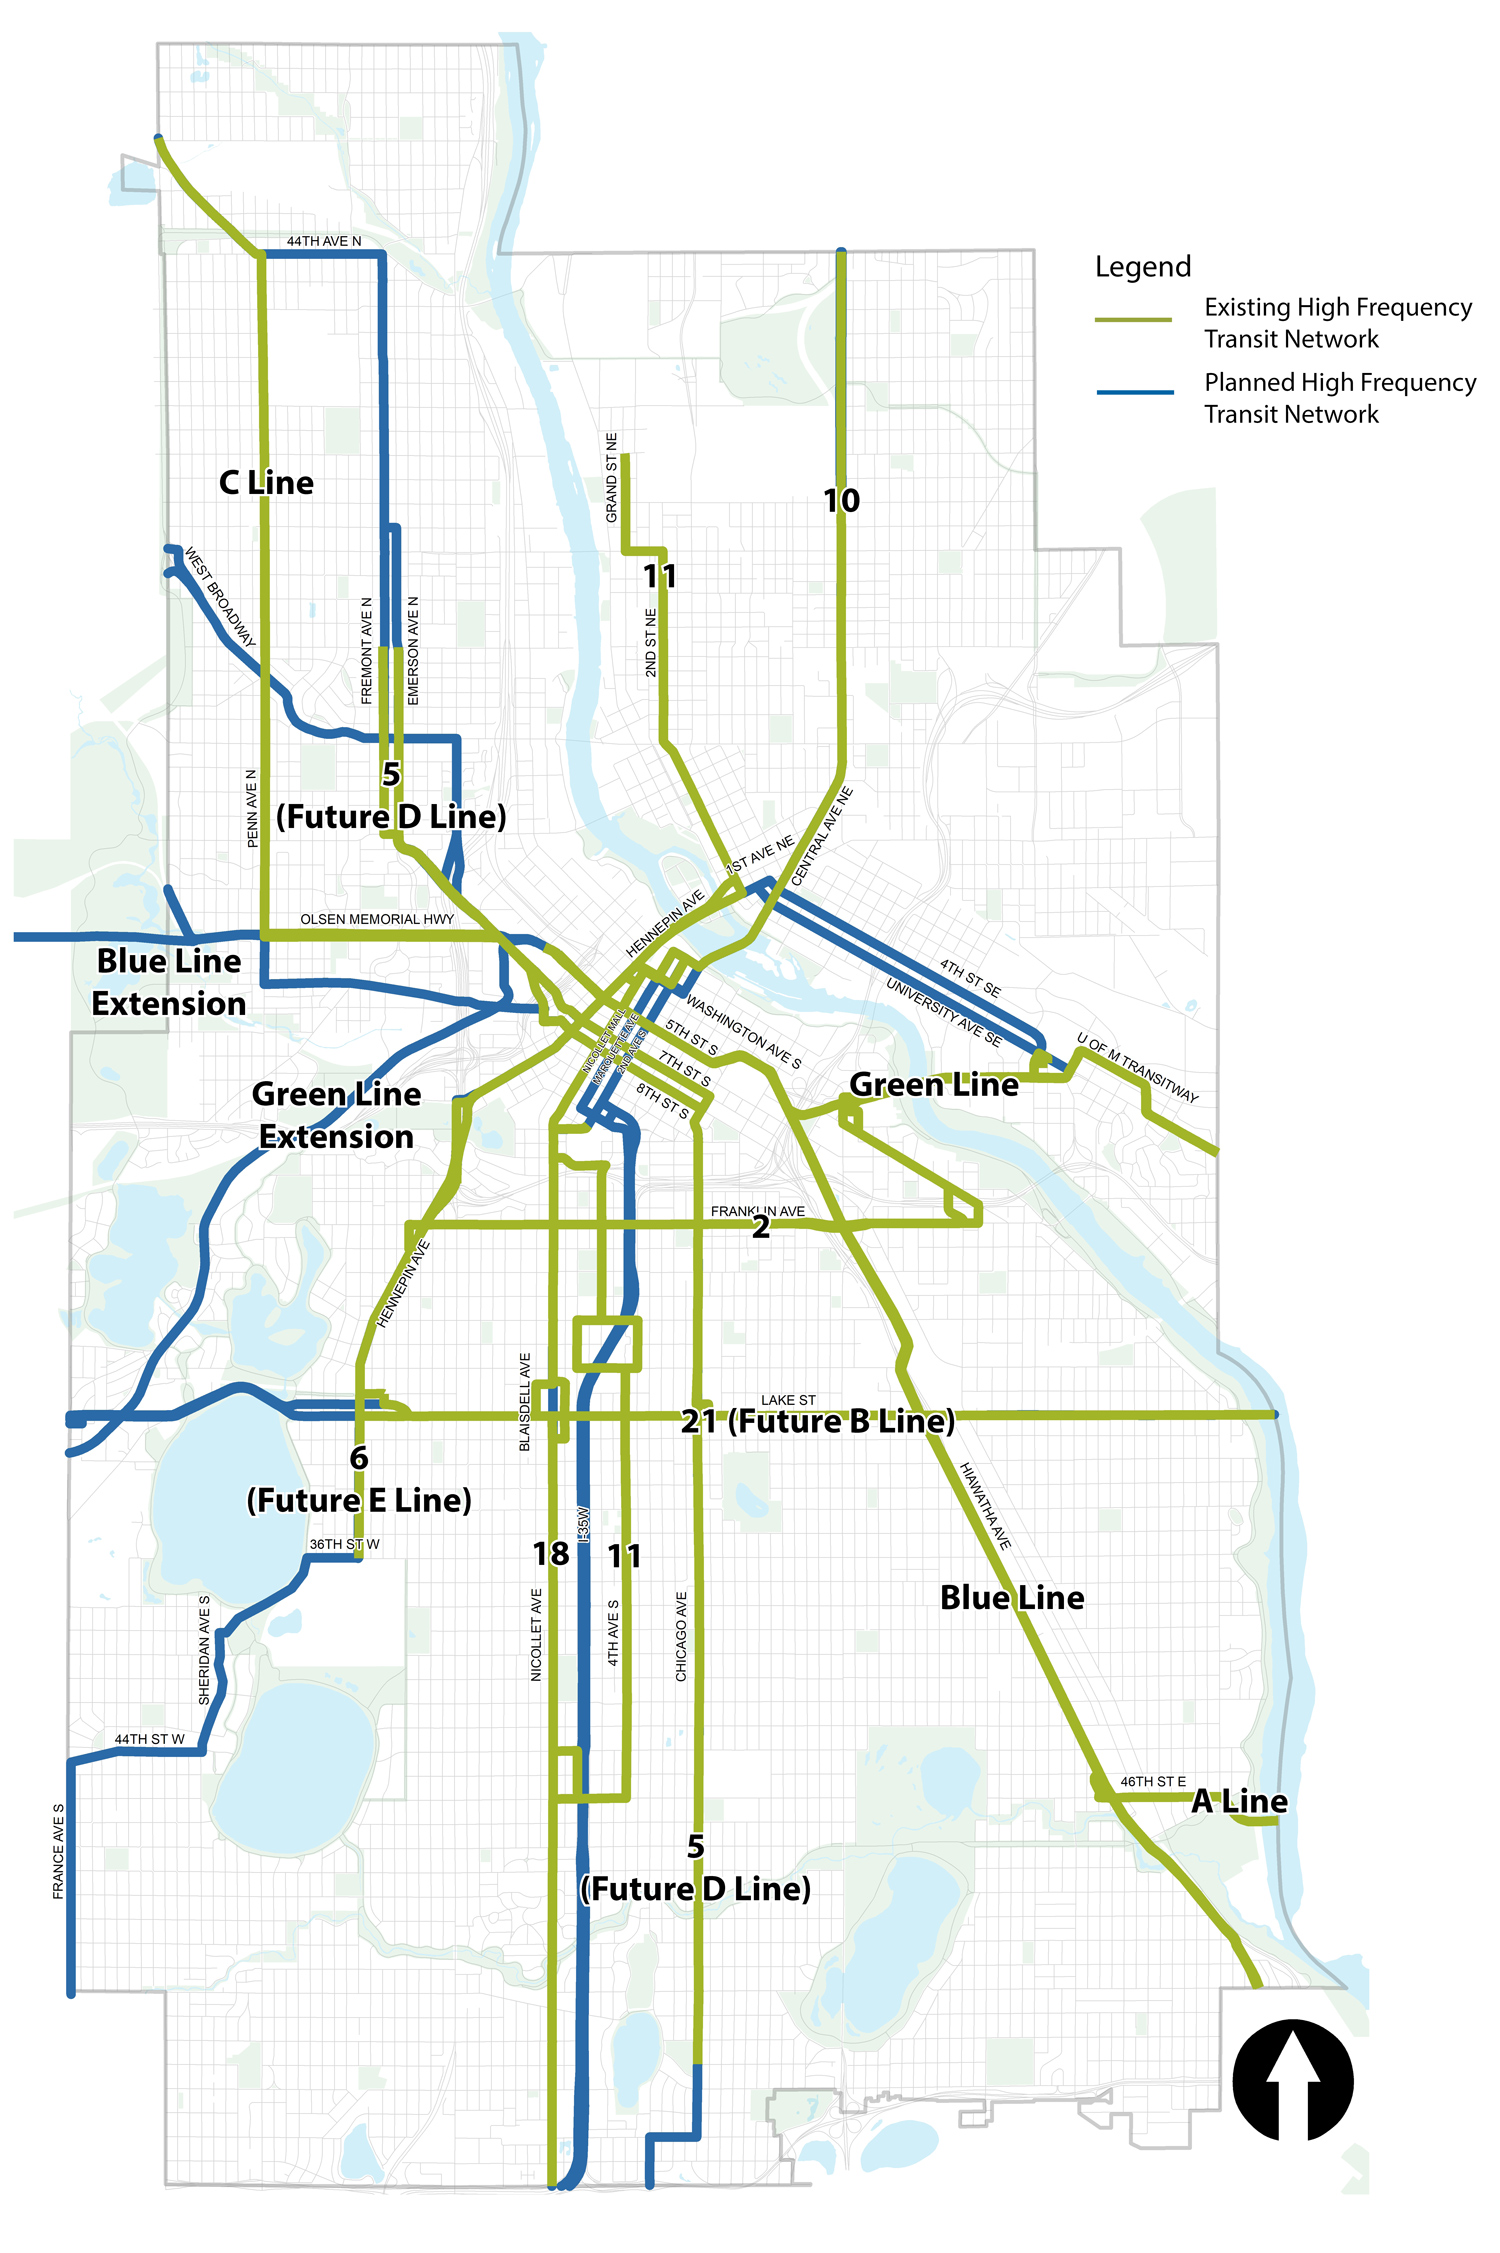 Existing and planned high frequency transit routes